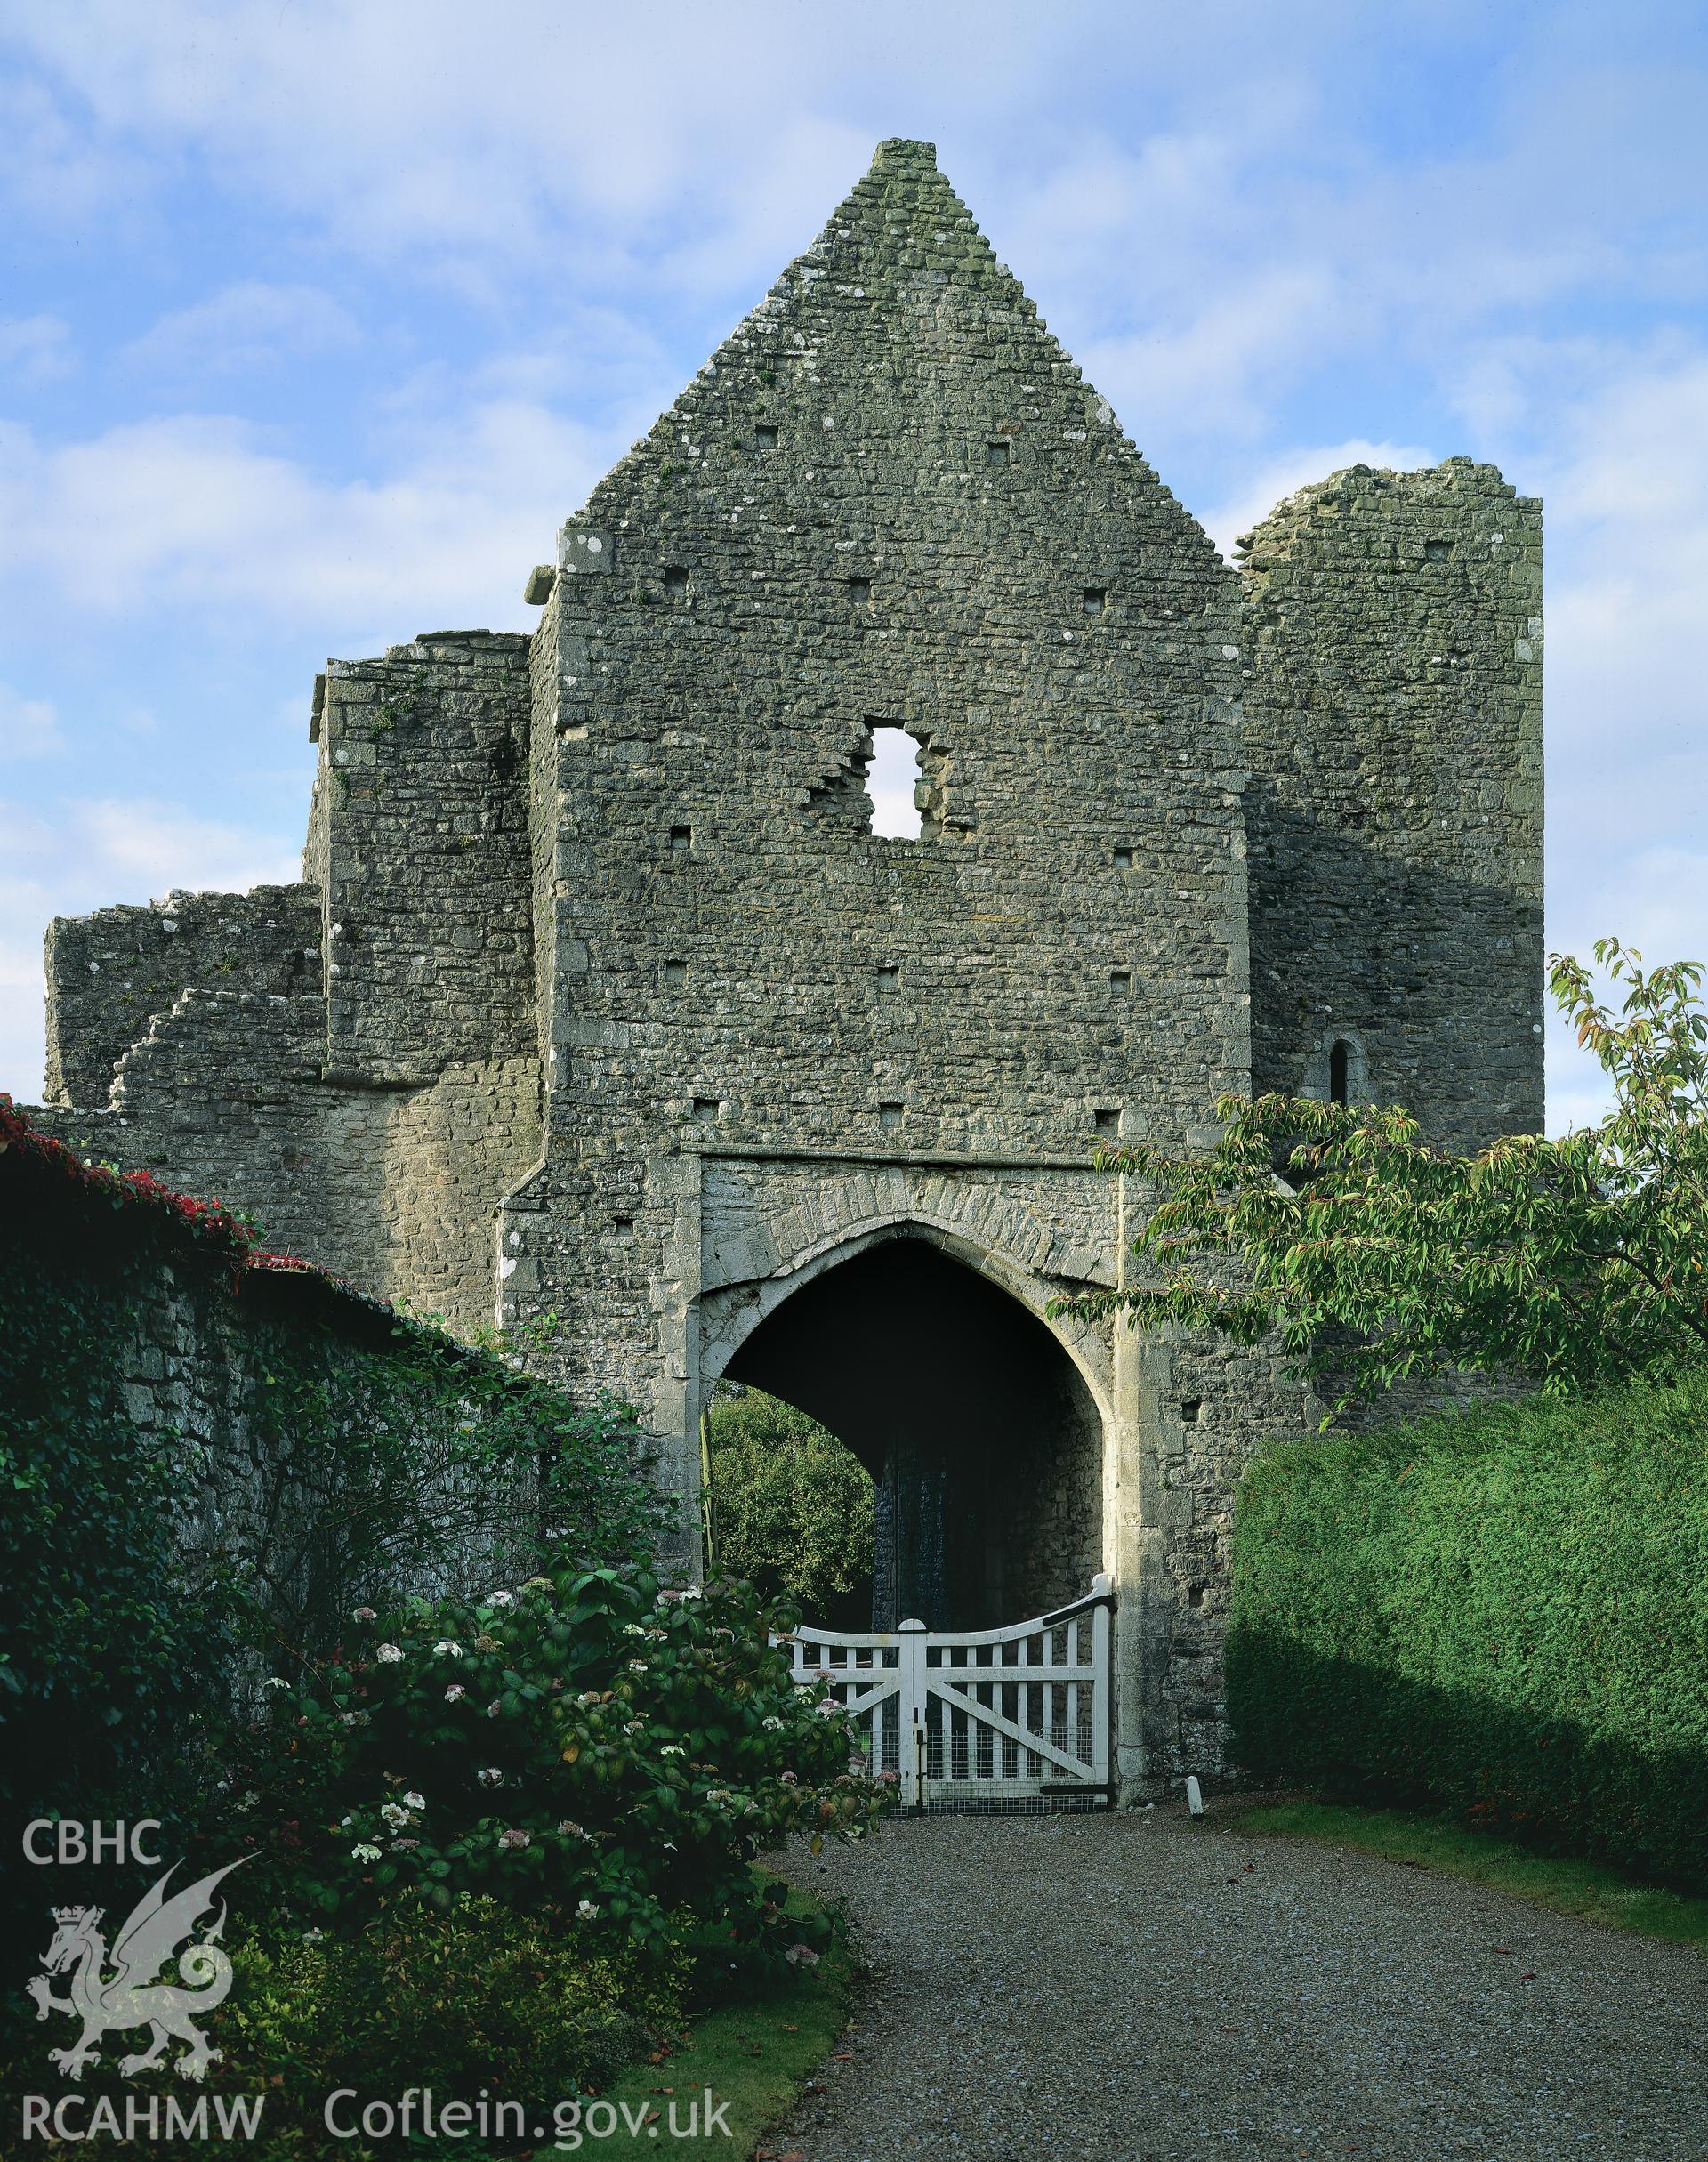 RCAHMW colour transparency showing the gatehouse at Ewenny Priory.